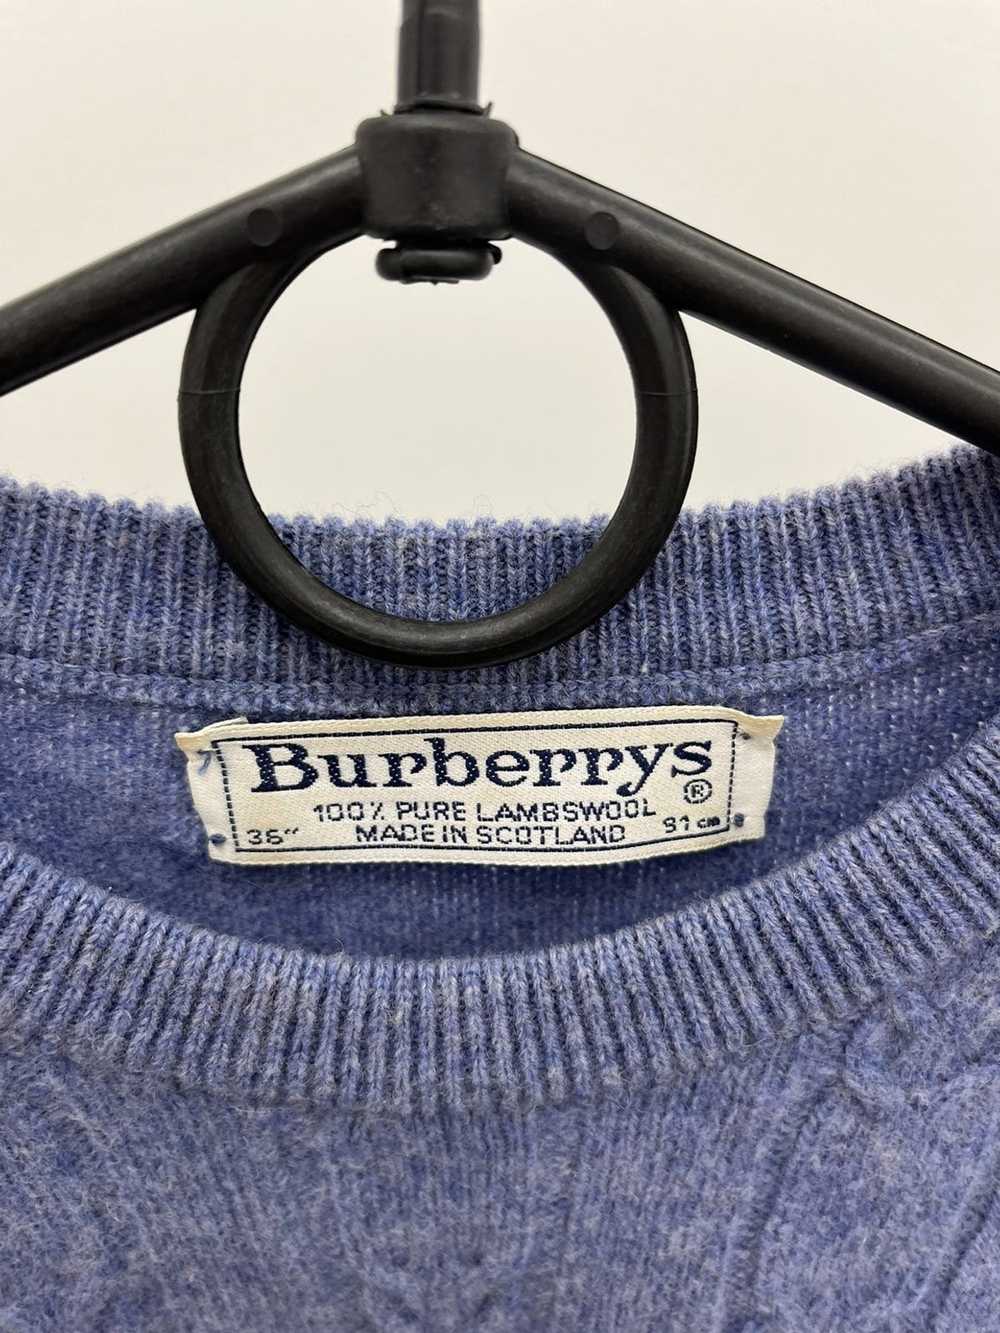 Burberry Vintage Burberrys Wool Knit Sweater - image 3